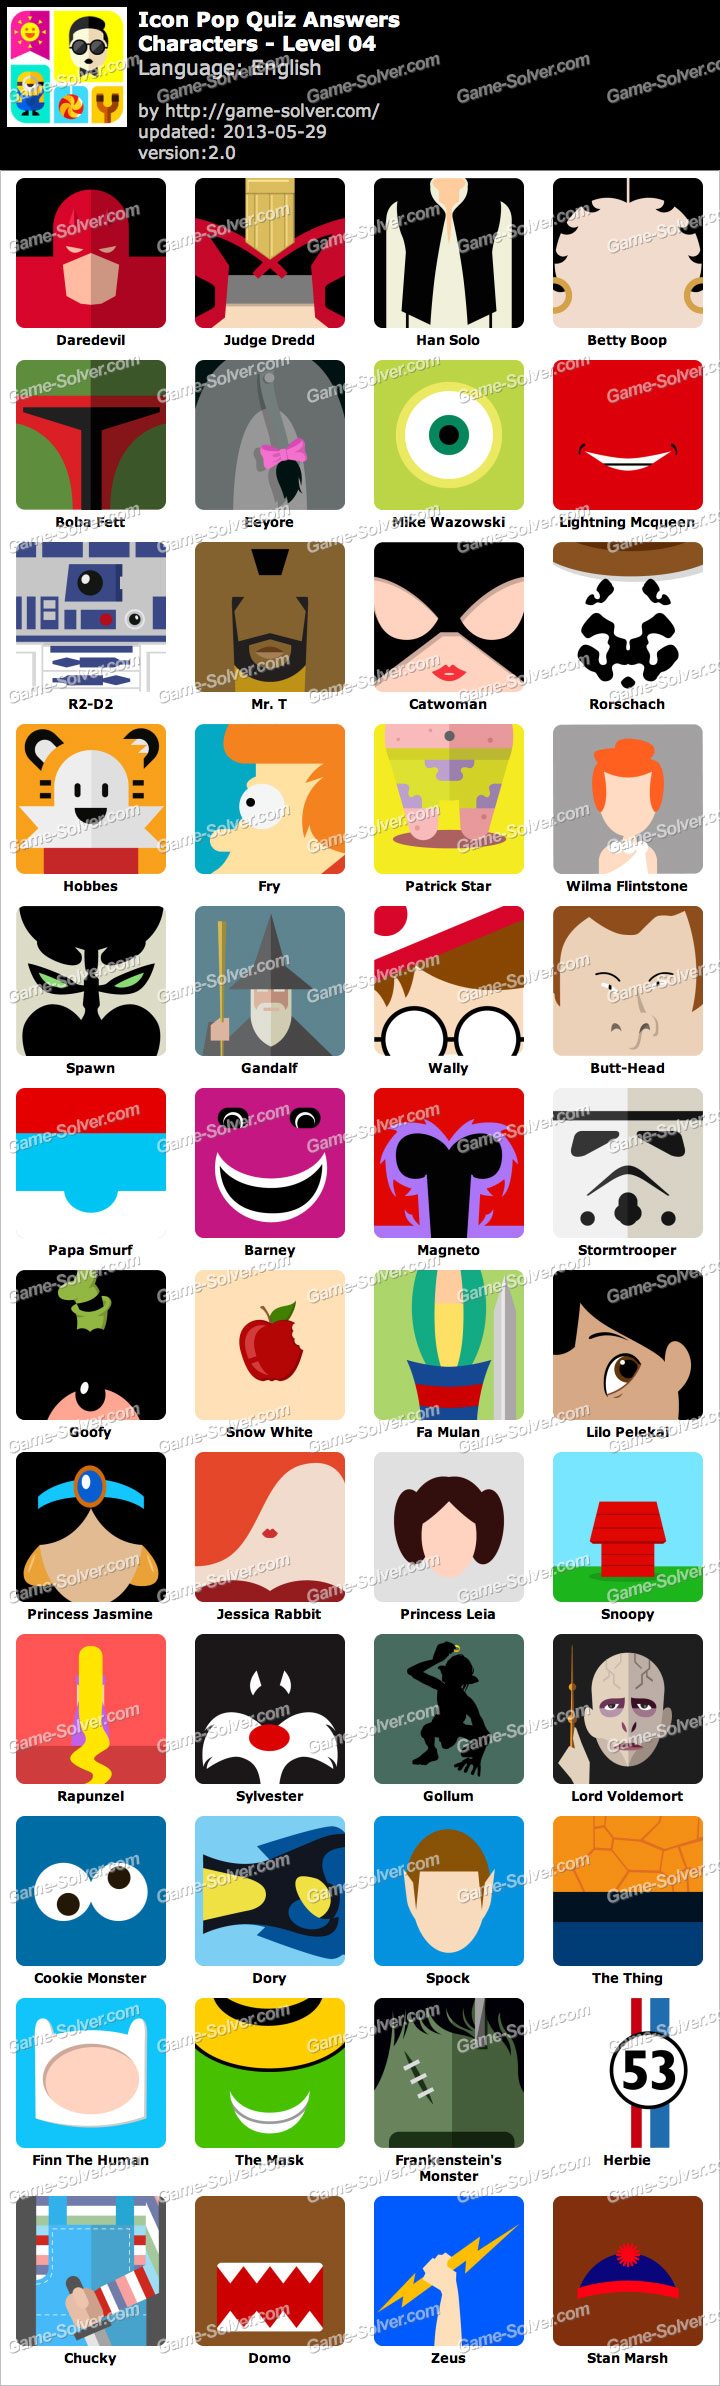 icon-pop-quiz-characters-level-4-game-solver